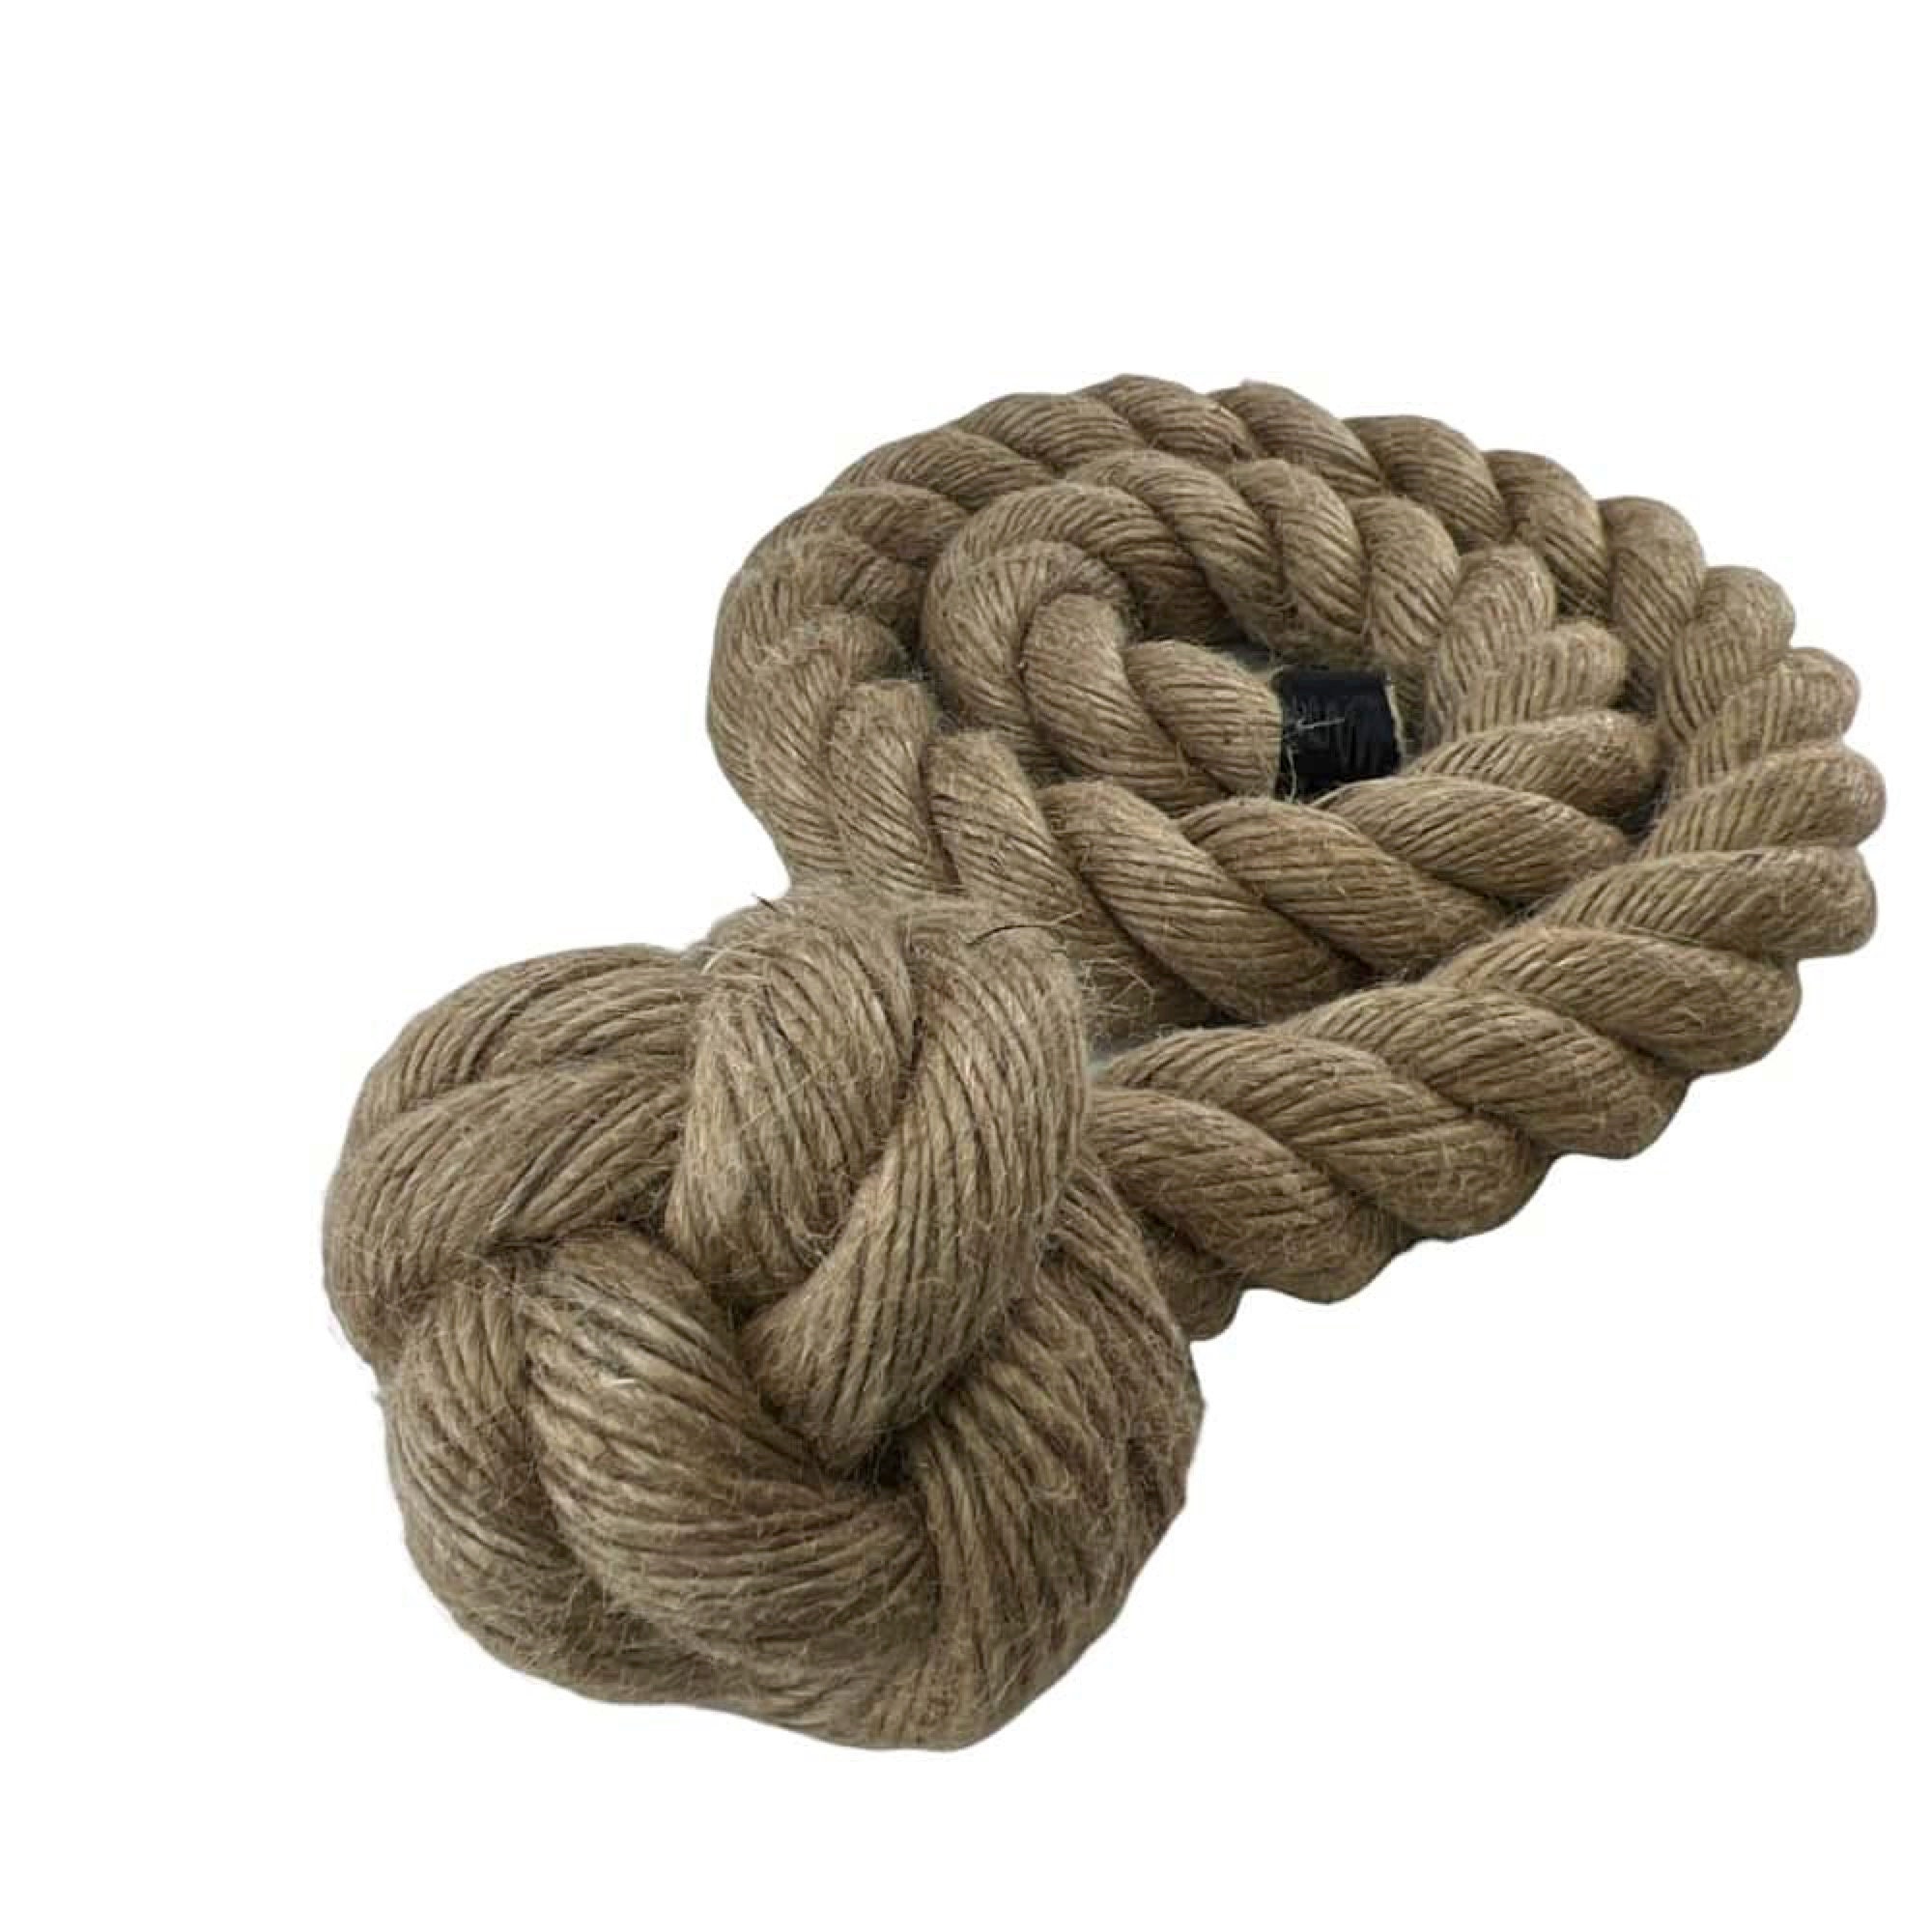 28mm Natural Jute Decking Rope With Man Rope Knot Select Length & End 